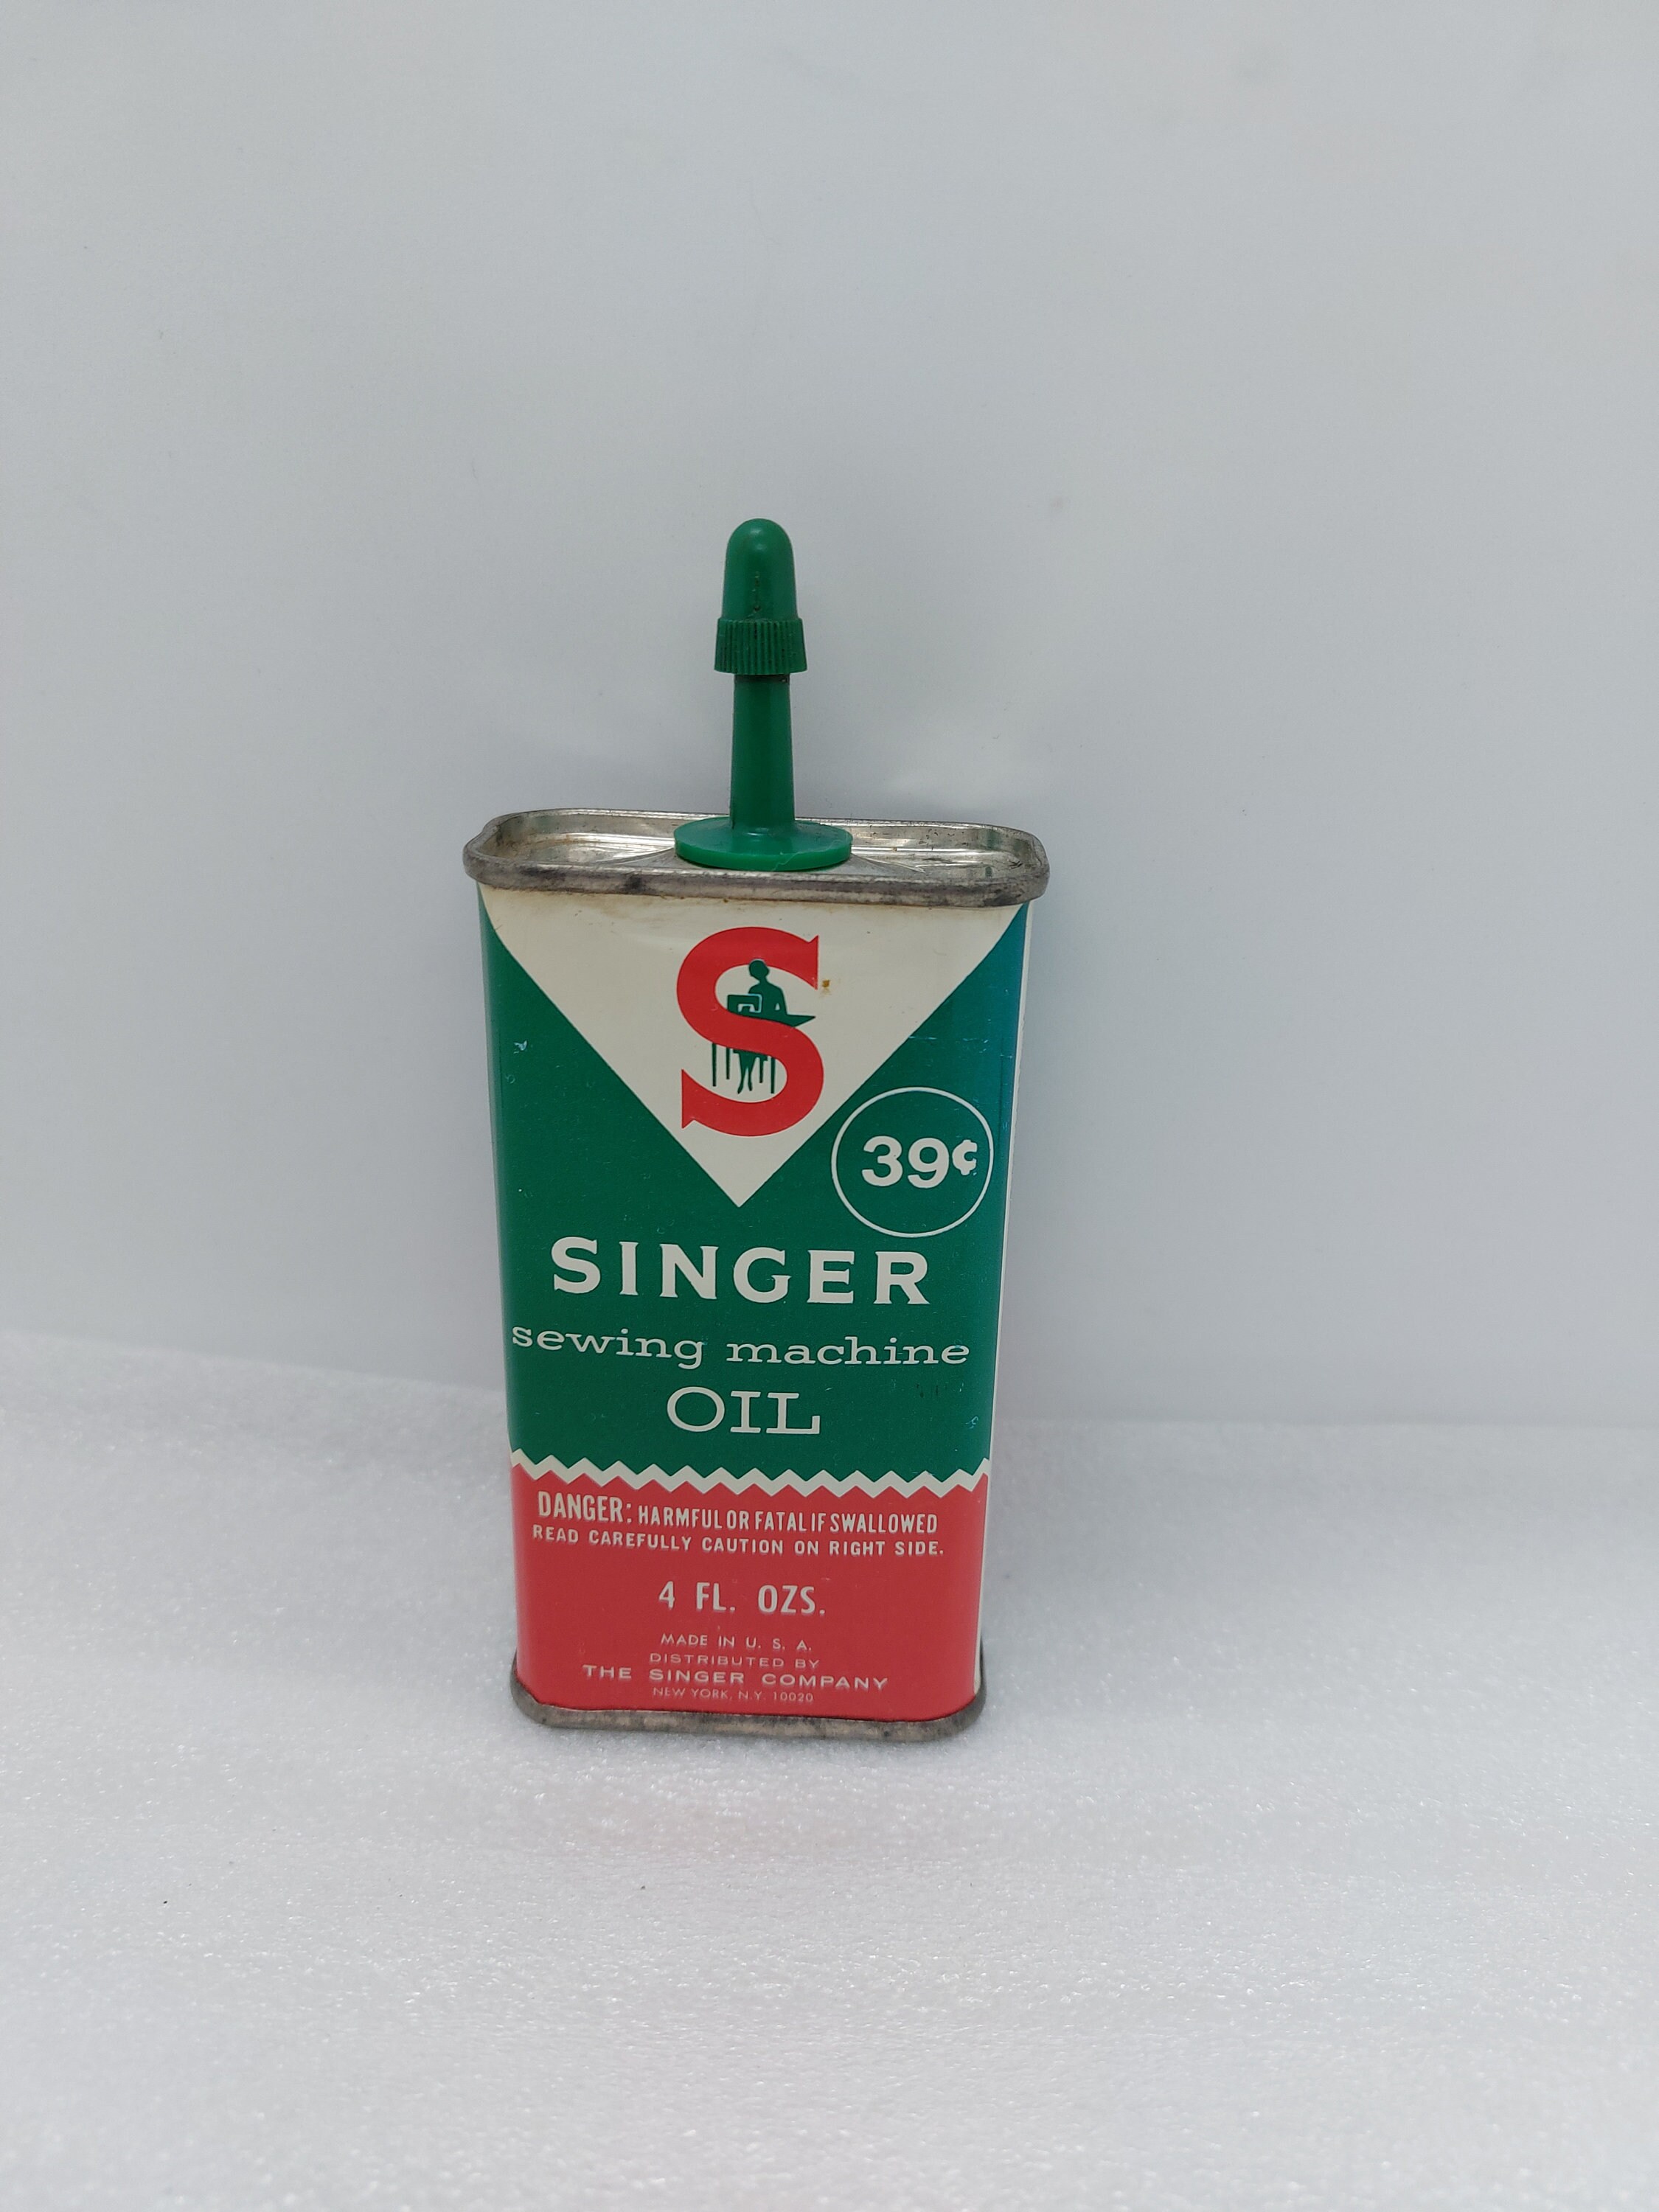 Vintage Singer Sewing Machine Oil 39 Cent Tin Can Advertising 